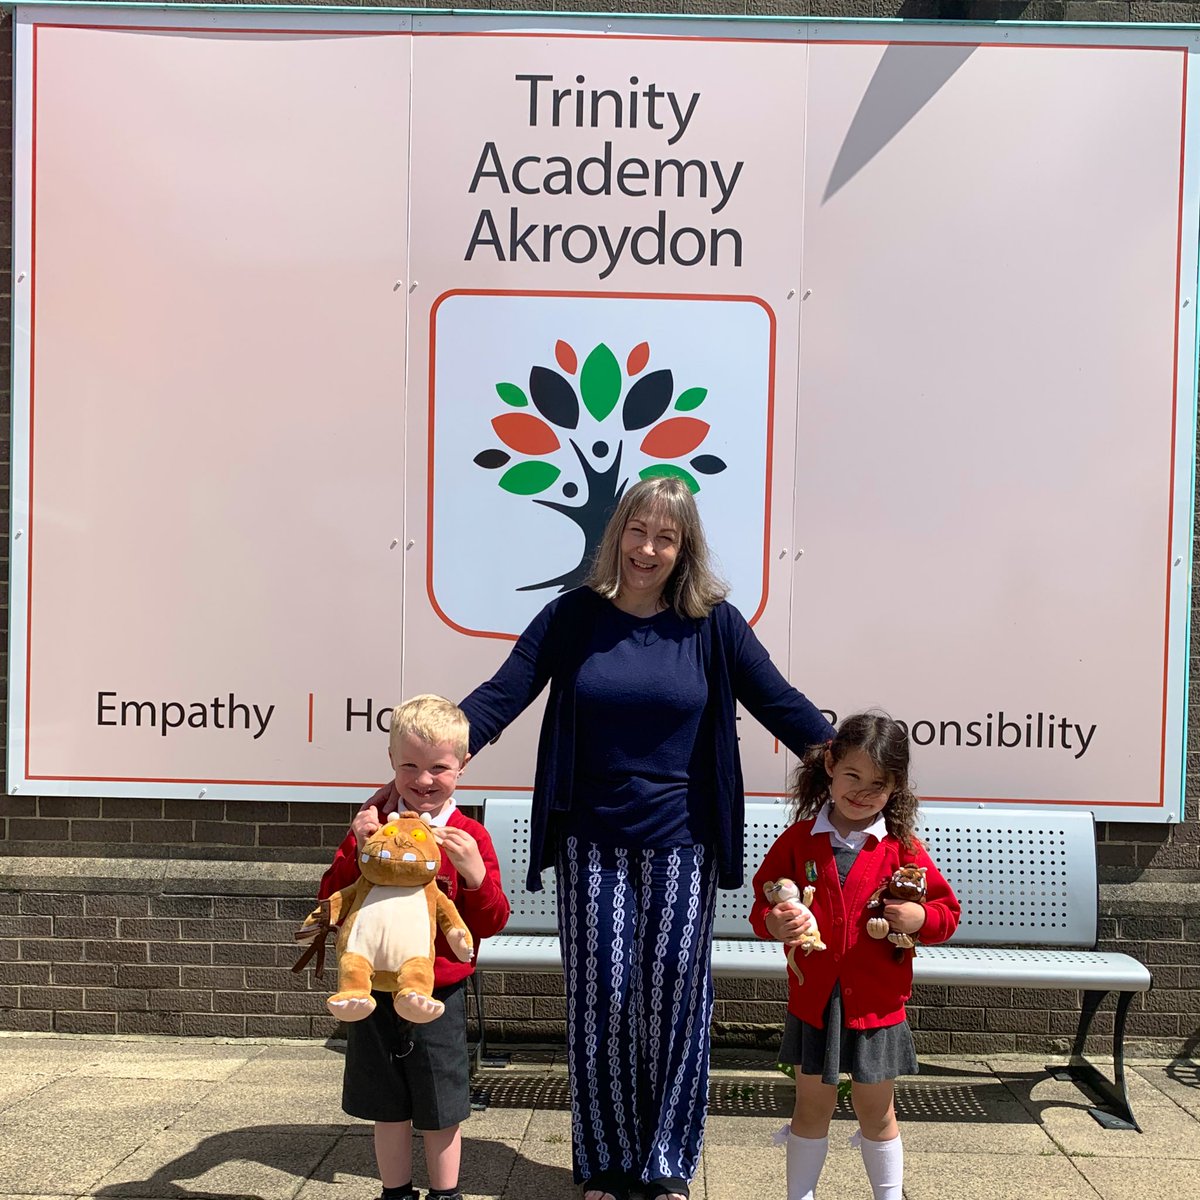 Thank you so much to @TraceyHamer3 for donating Gruffalo resources to support our EYFS transition sessions… ☺️

We loved showing you around our amazing academy, especially the visit to your first classroom 👩🏼‍🏫